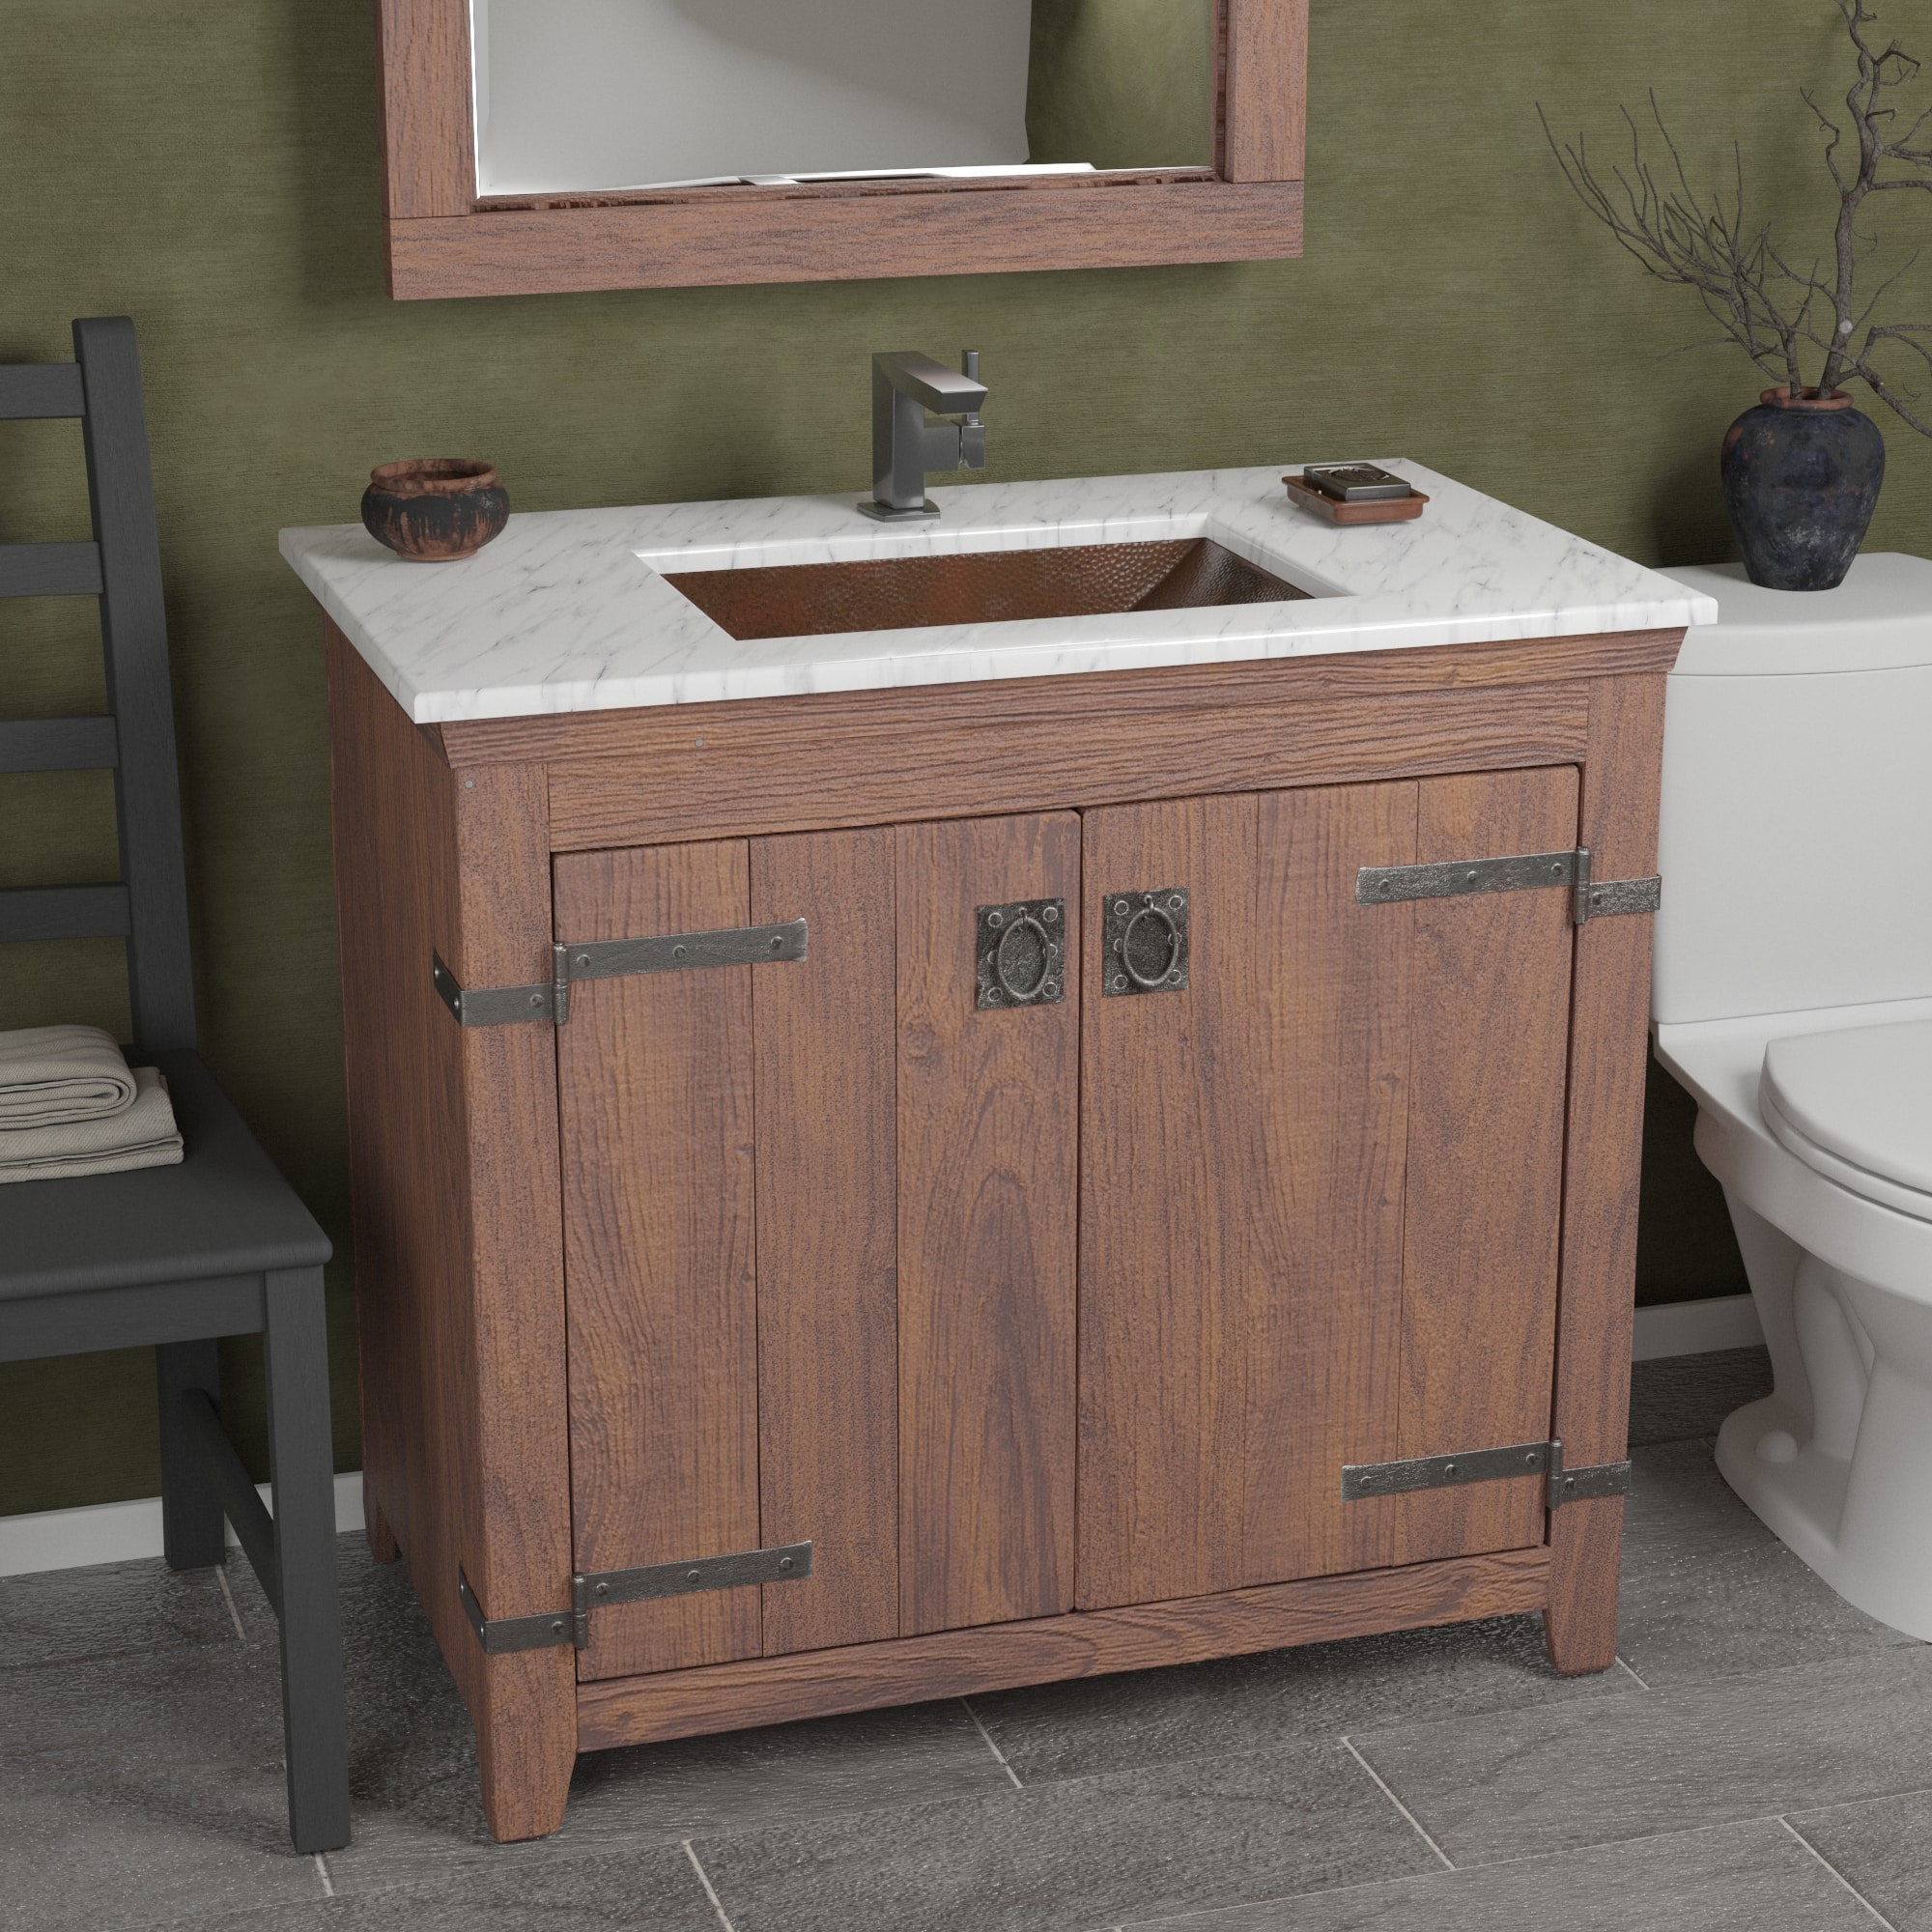 Native Trails 36" Americana Vanity in Chestnut with Carrara Marble Top and Avila in Antique, Single Faucet Hole, BND36-VB-CT-CP-003